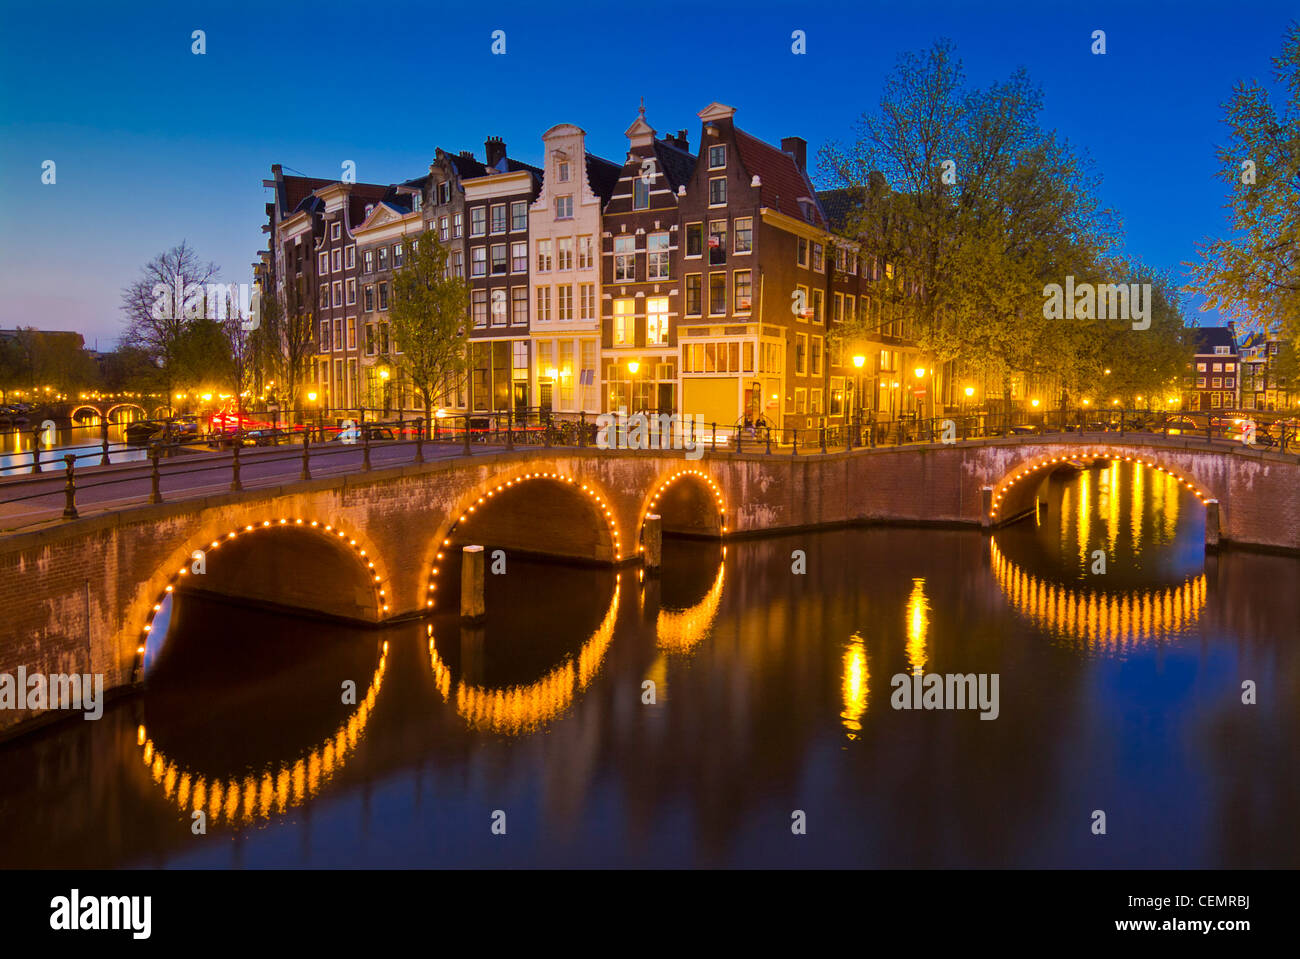 Illuminated bridges over the Keizersgracht and Leidsestraat canals Amsterdam Holland the Netherlands EU Europe Stock Photo